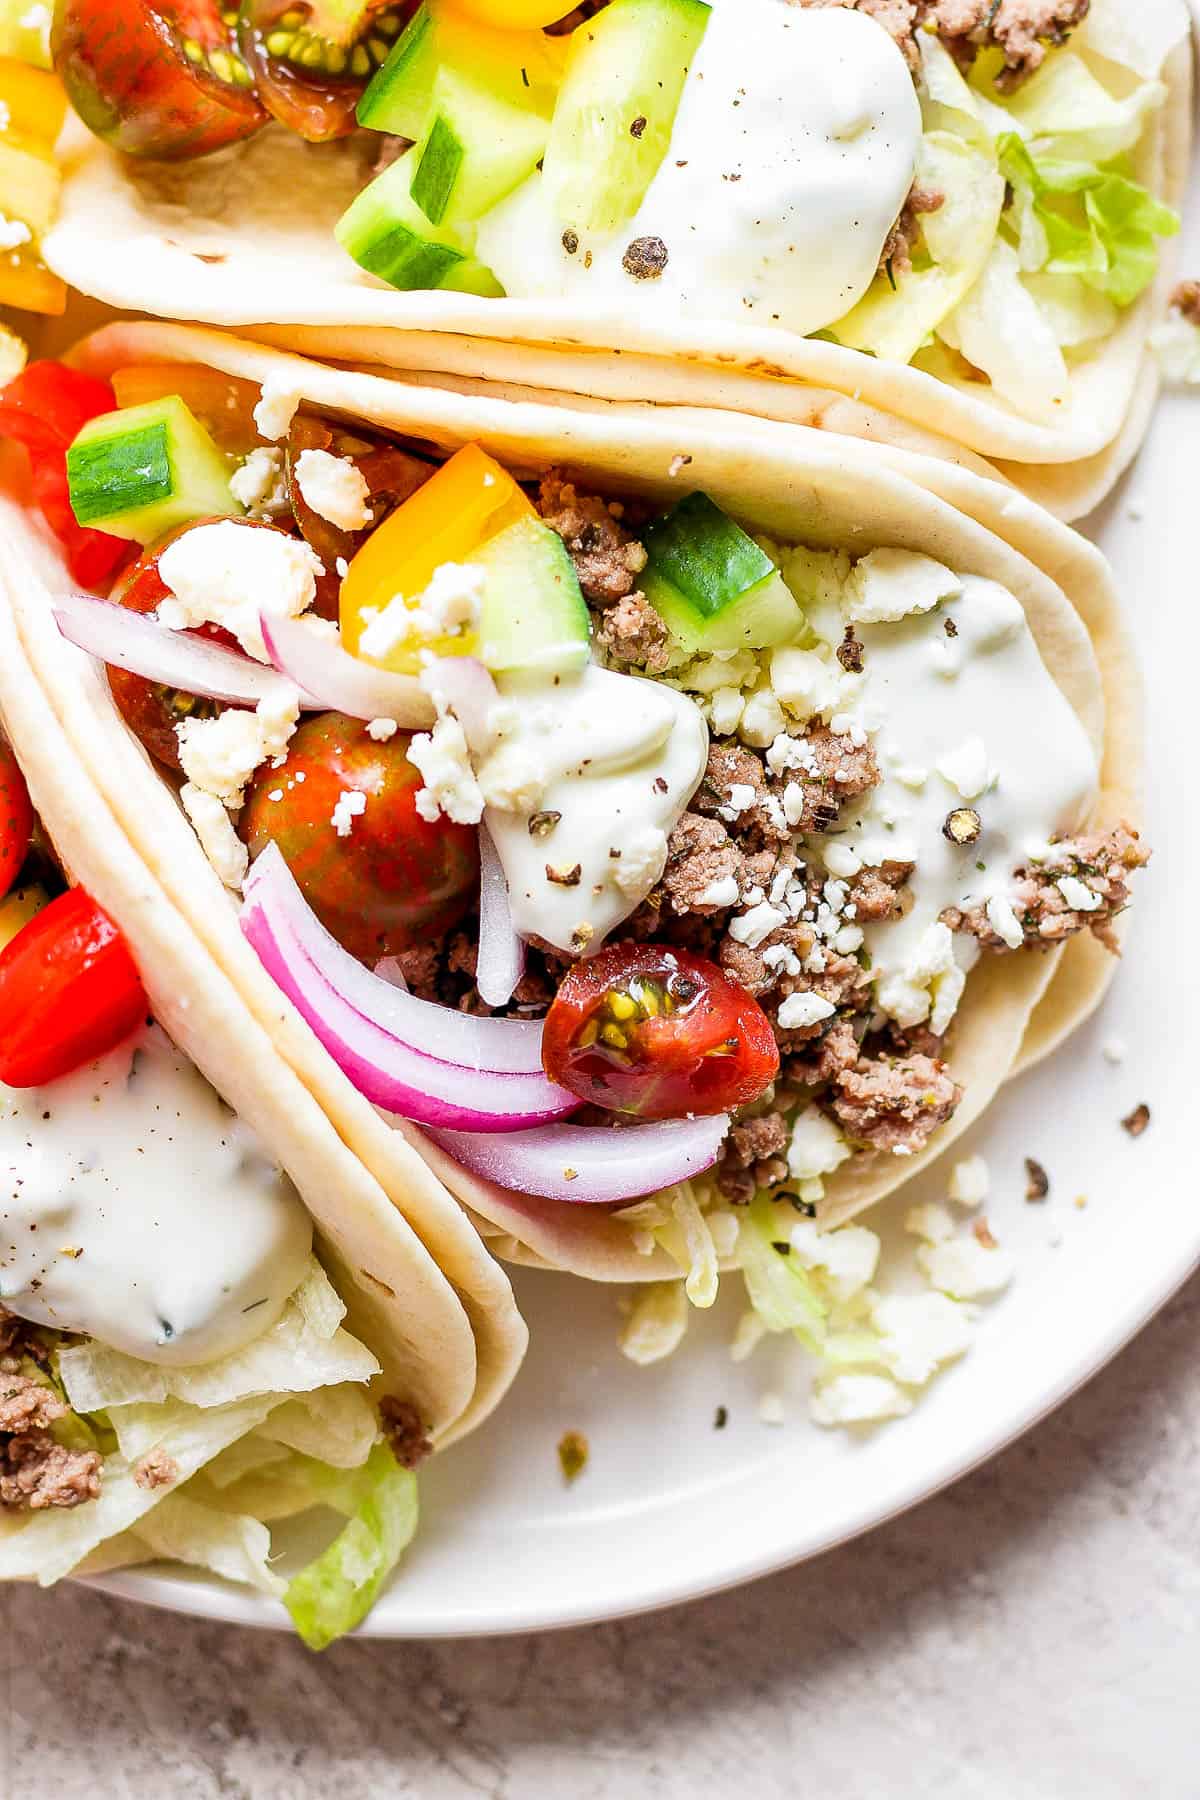 Three lamb tacos on a plate topped with red onion, cucumber, cherry tomatoes, feta, and tzatziki sauce.